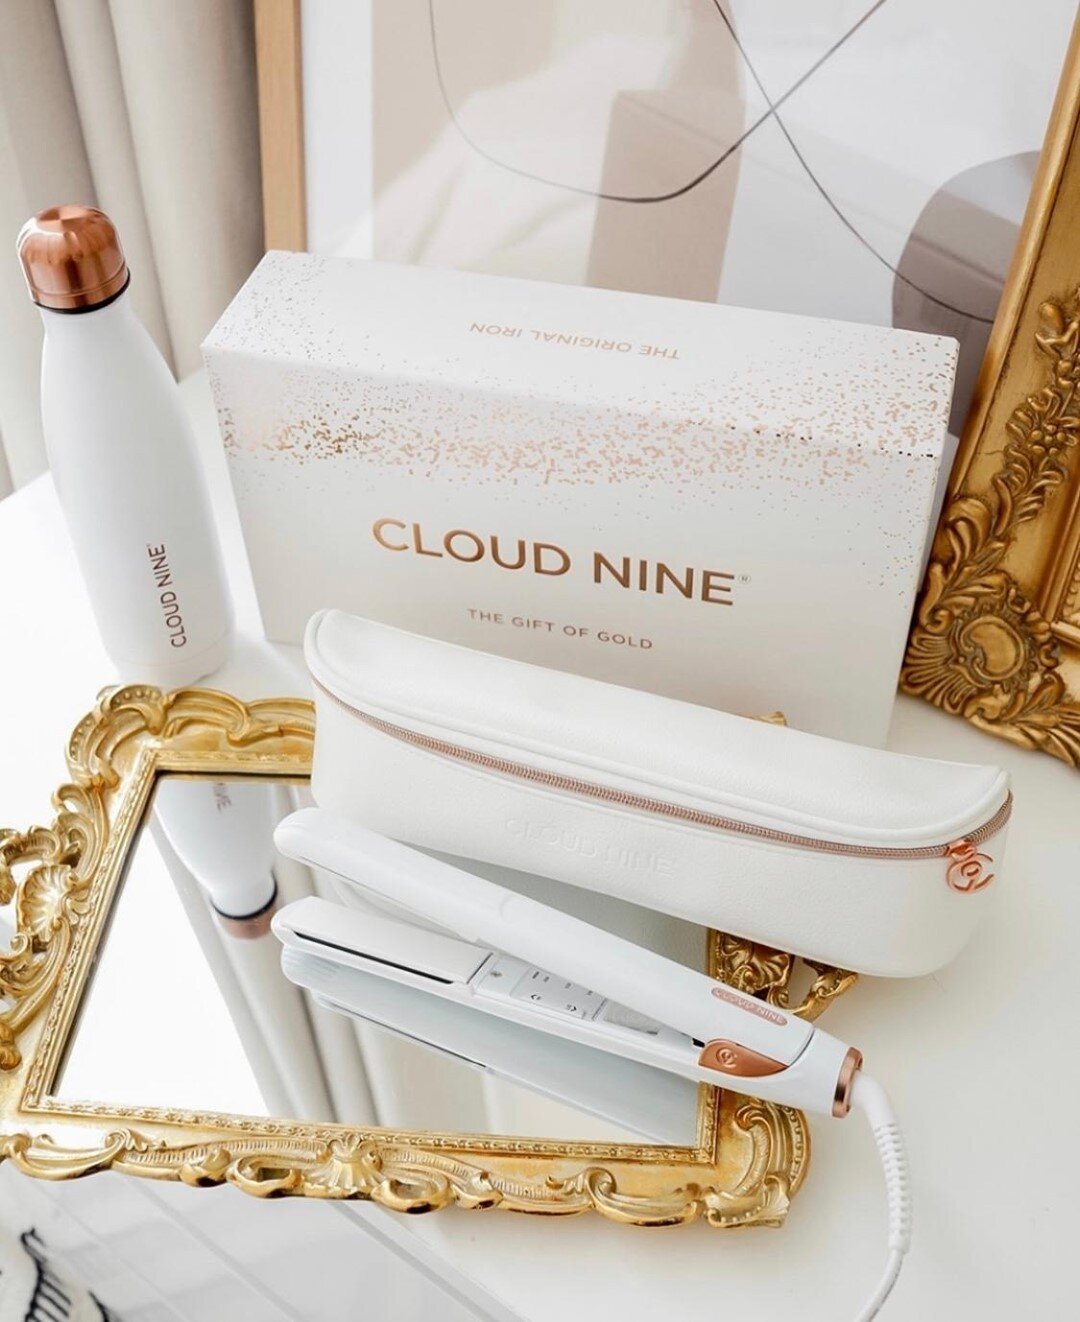 If there's one straightener we recommend to our clients, it's the @cloudnineoz! 🙌🏻⁠
⁠
They heat up super fast (within 20 seconds! 😱), and have variable temperature controls depending on your hair type.⁠
⁠
We love that Cloud Nine tools are as funct